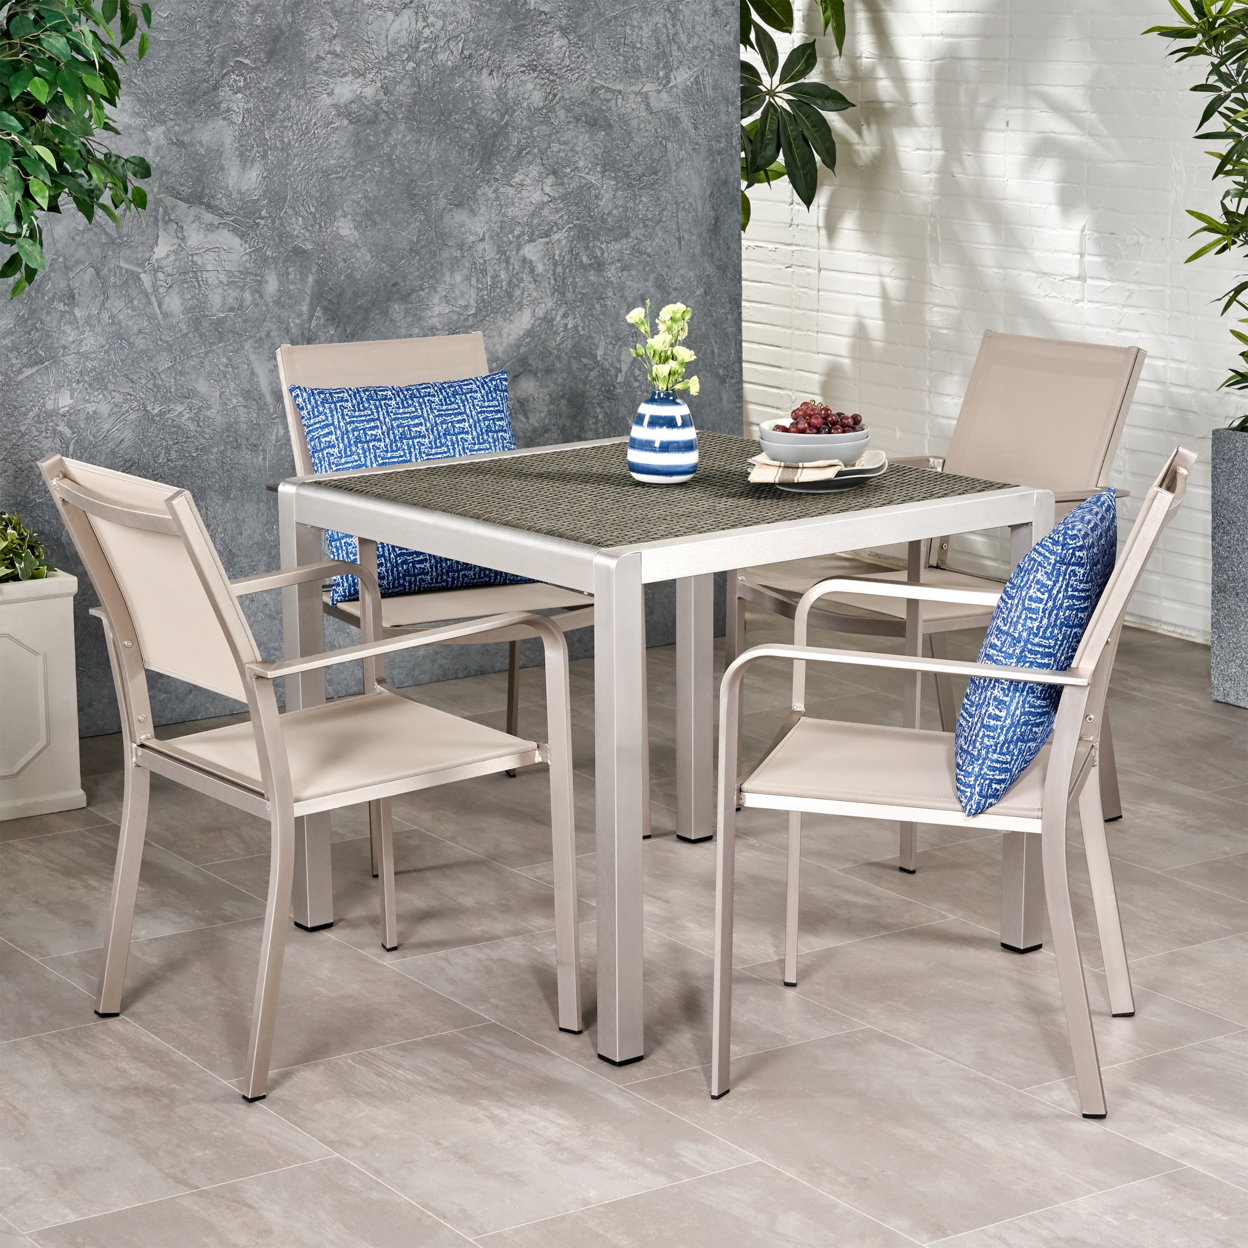 Annabelle Outdoor Modern 4 Seater Aluminum Dining Set With Faux Wood Table Top - Aluminum + Tempered Glass + Outdoor Mesh